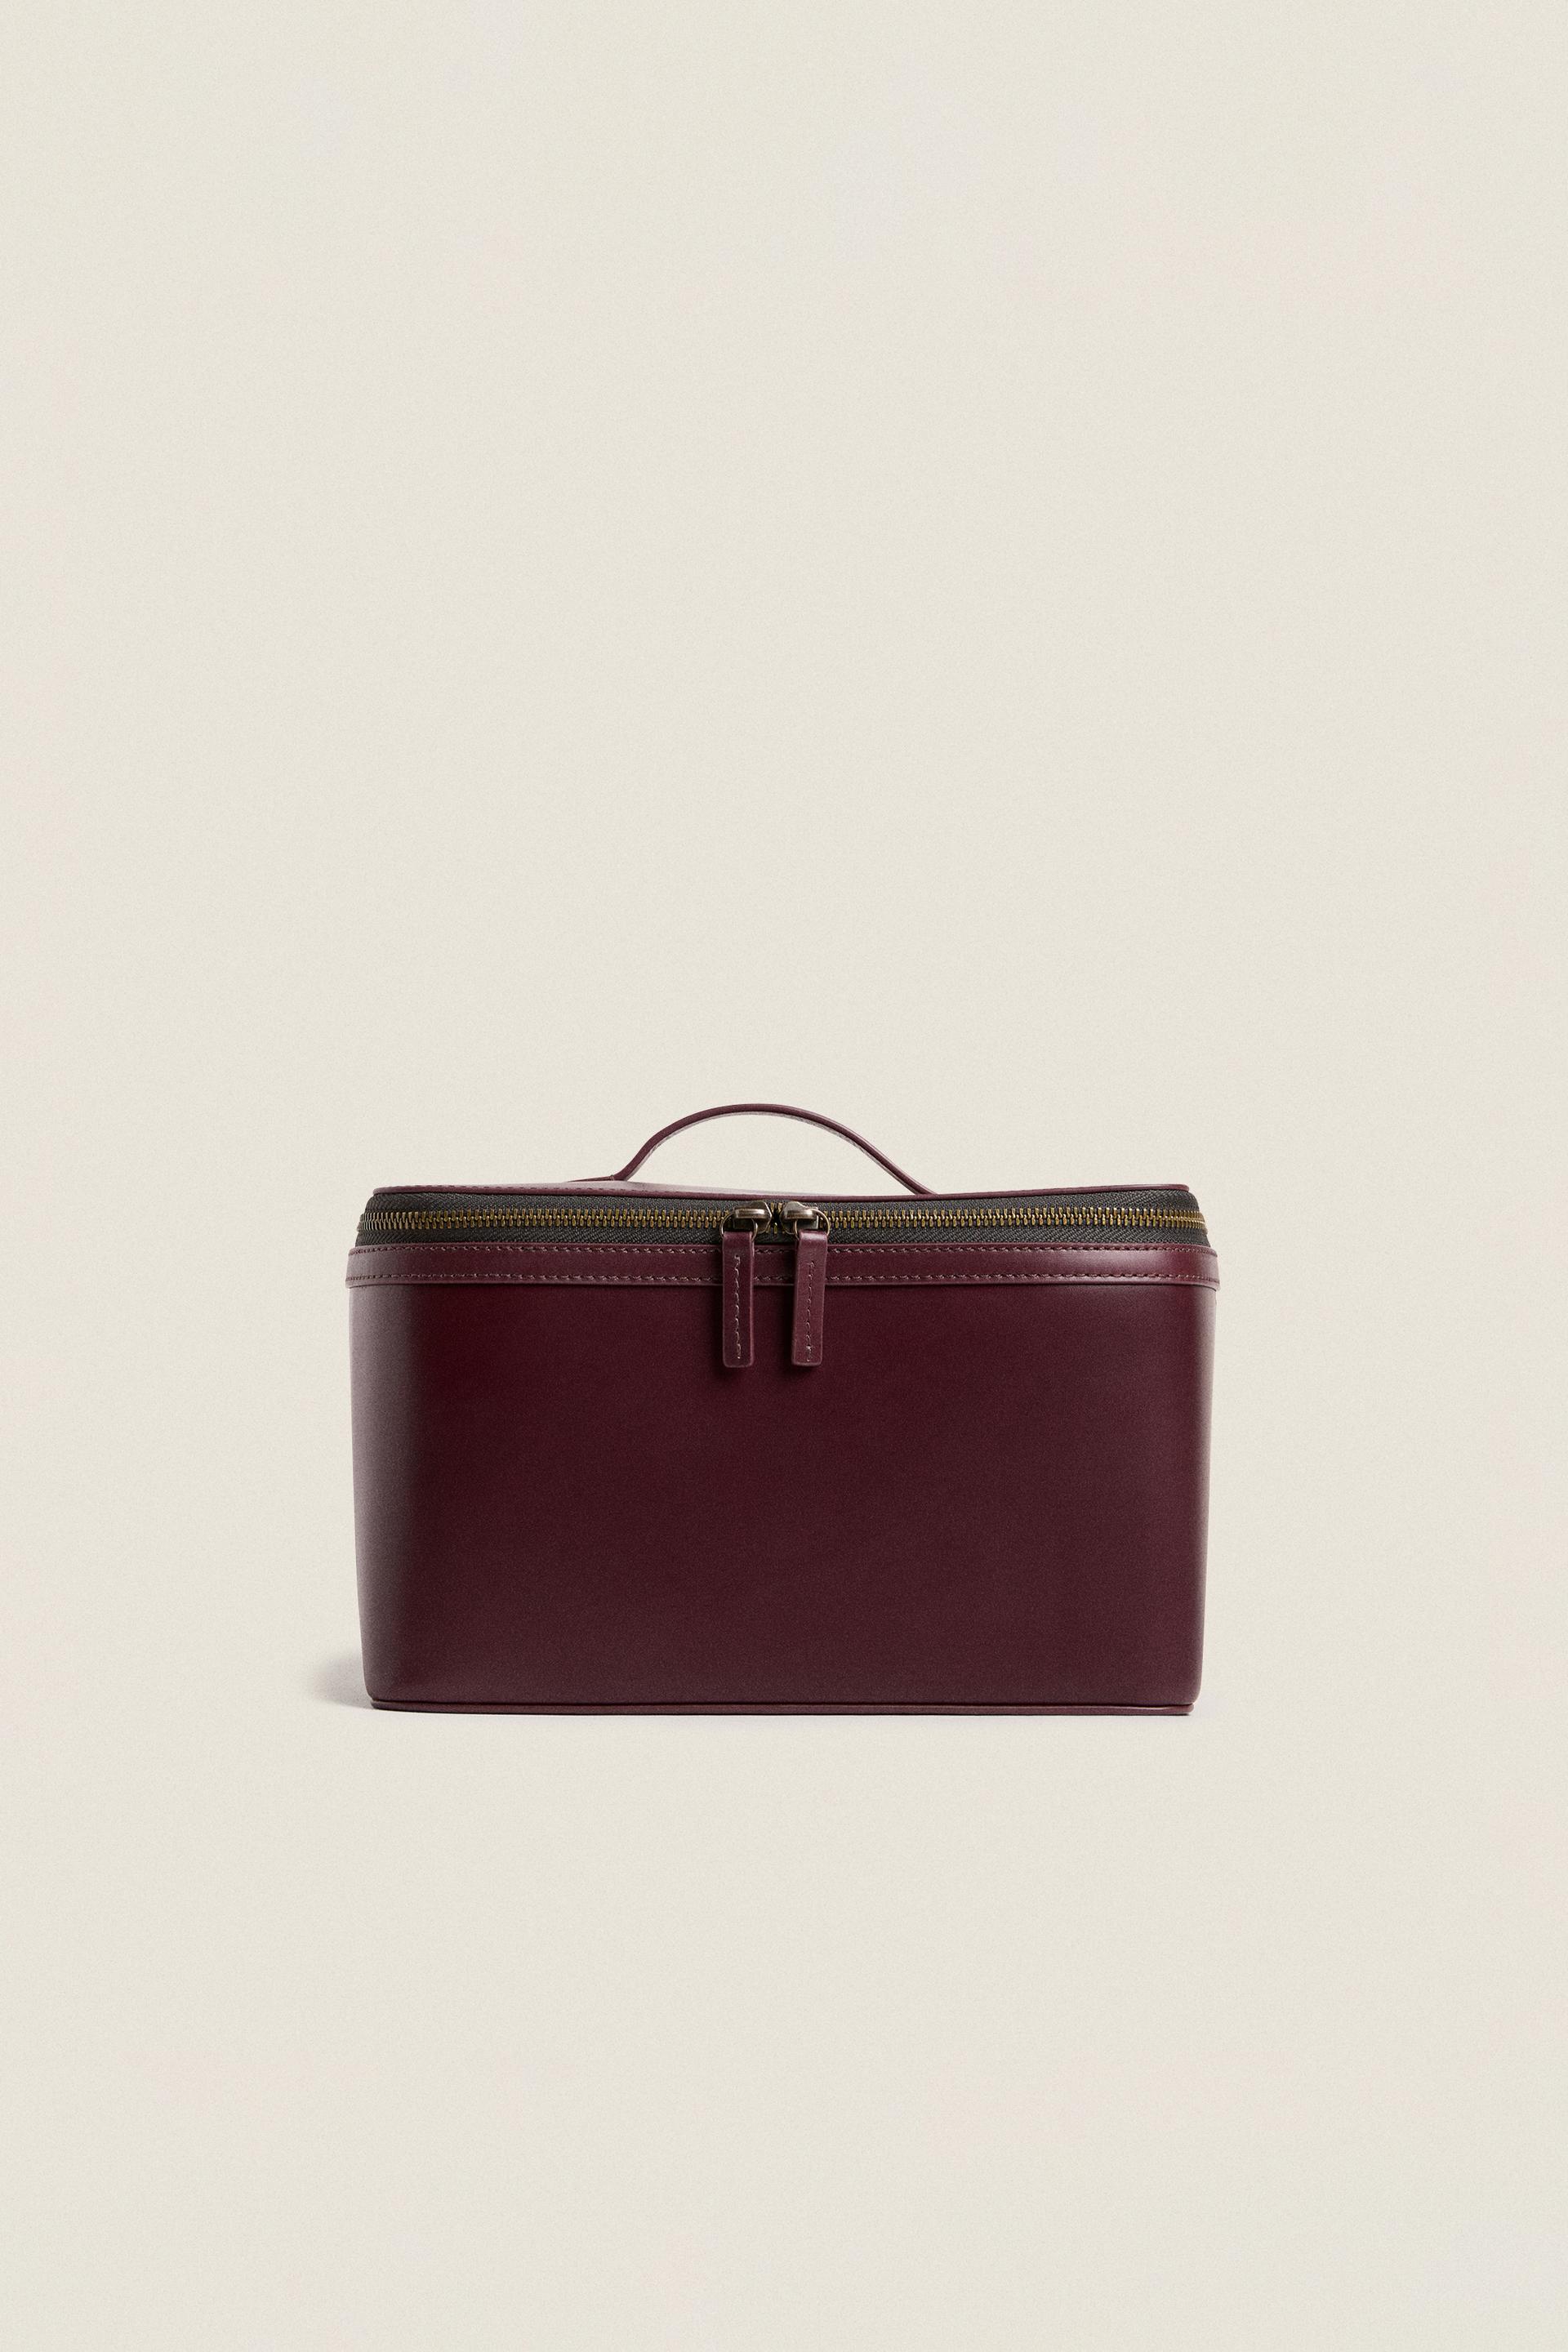 LARGE LEATHER TOILETRY BAG ZARA